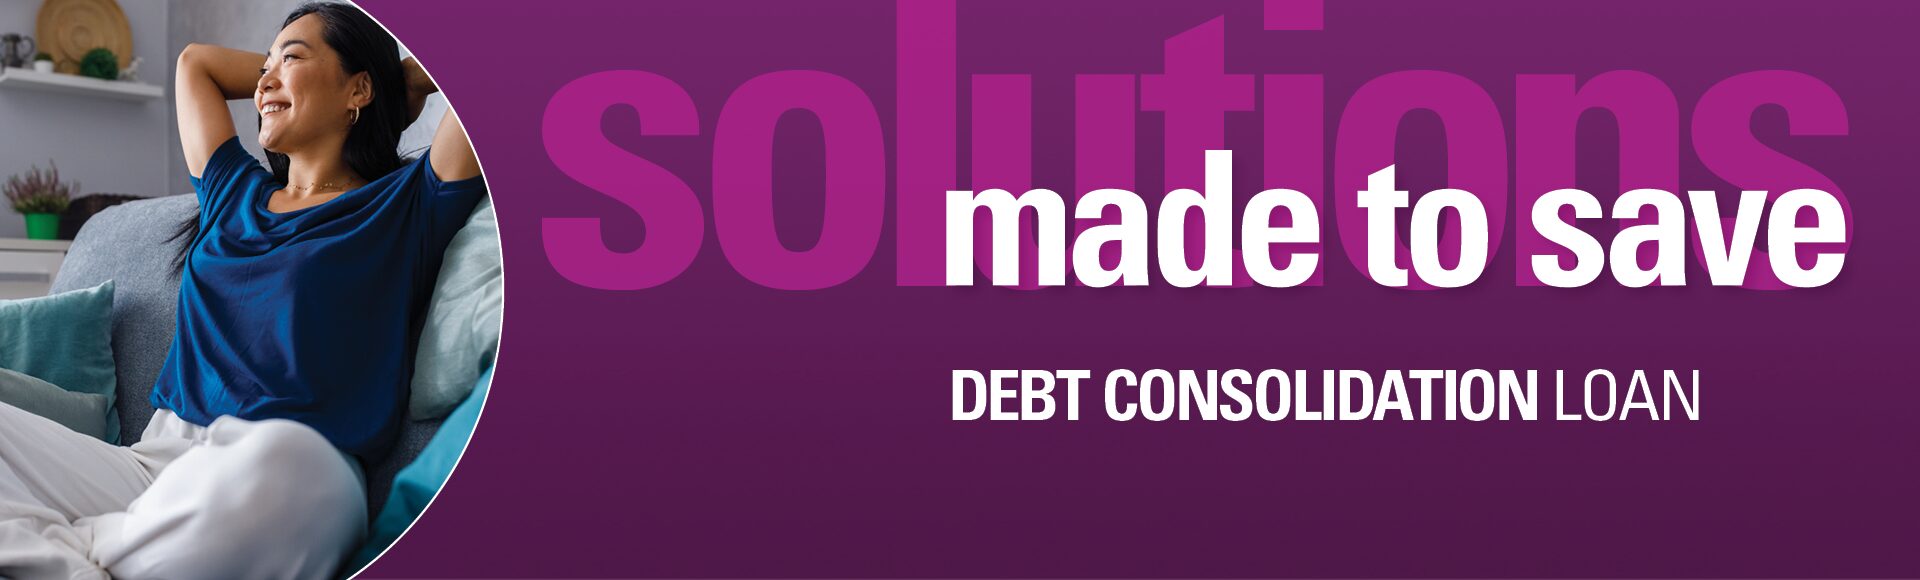 Text reads: "Solutions made to save. Debt Consolidation Loan." Image features a woman sitting on the couch comfortably and she is smiling.